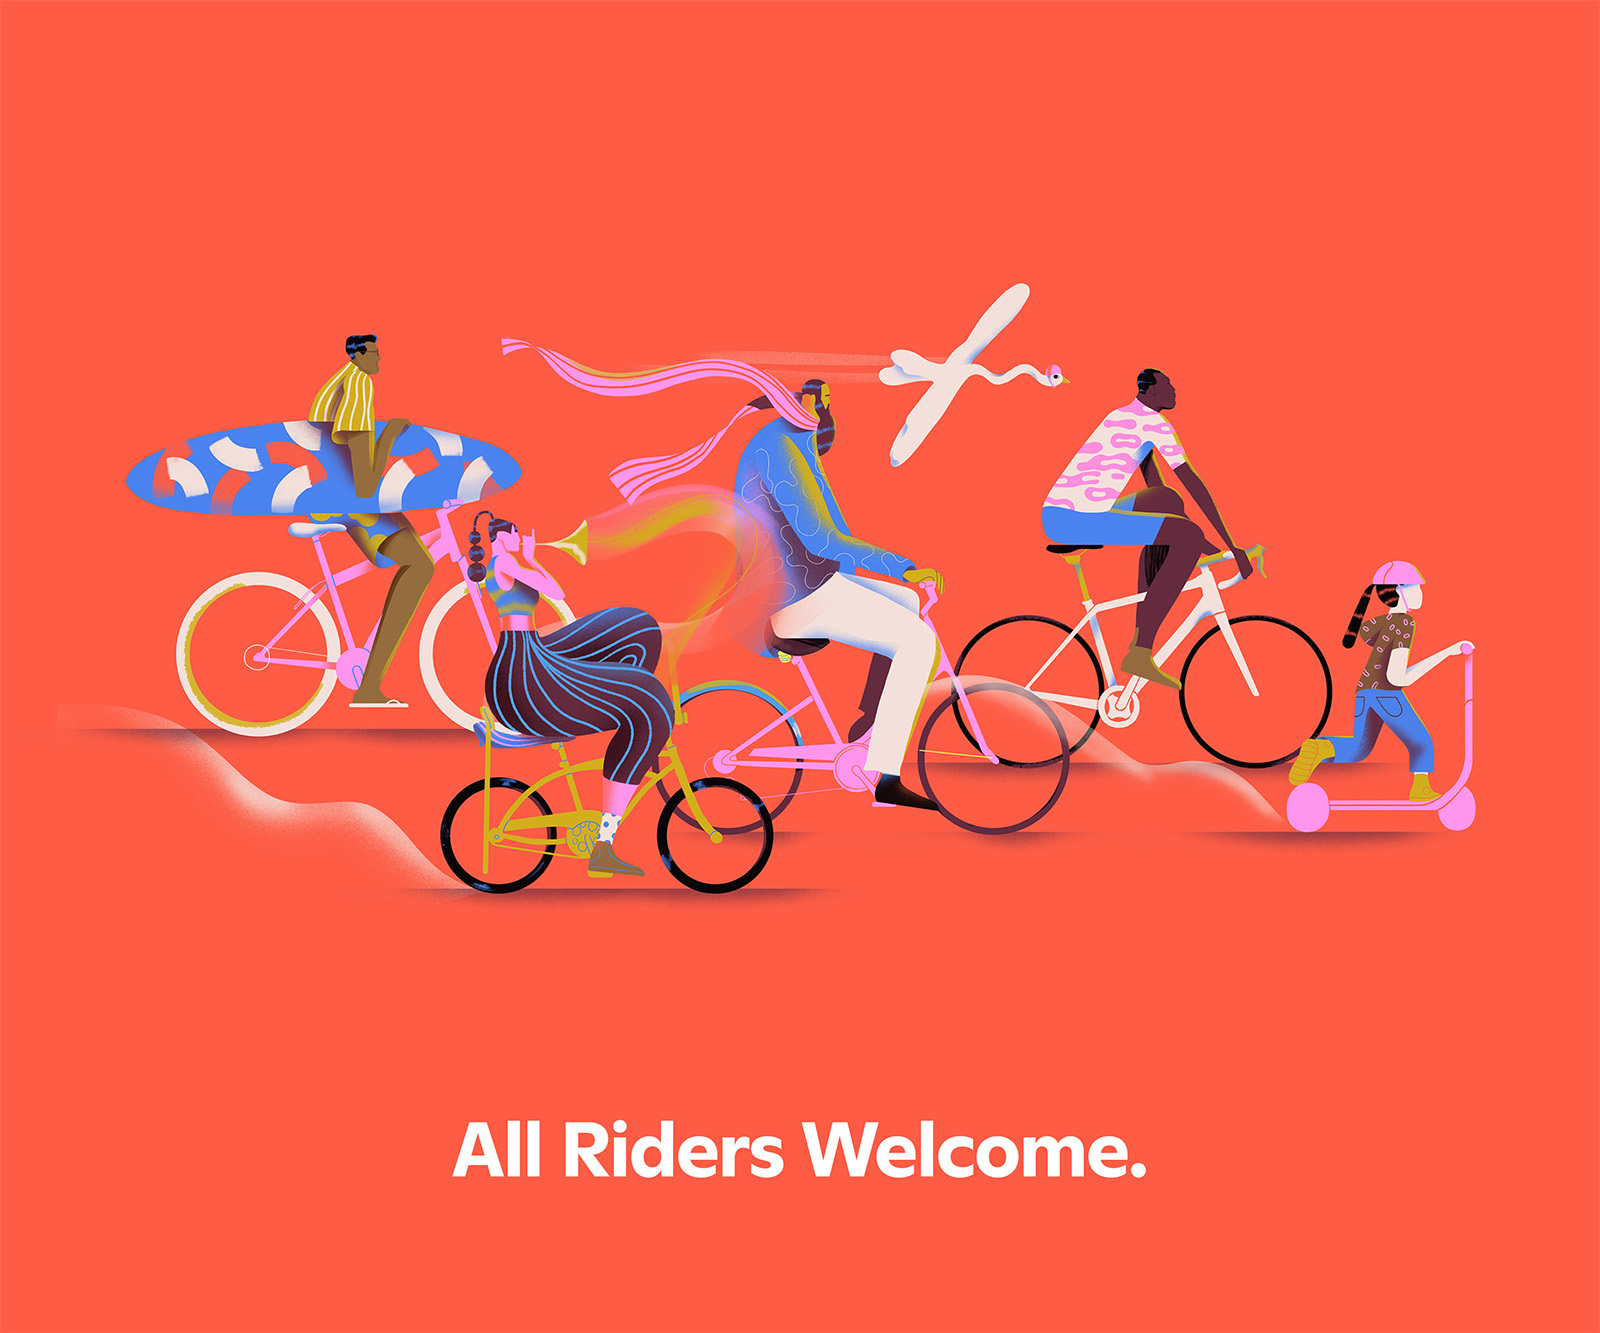 All Riders Welcome